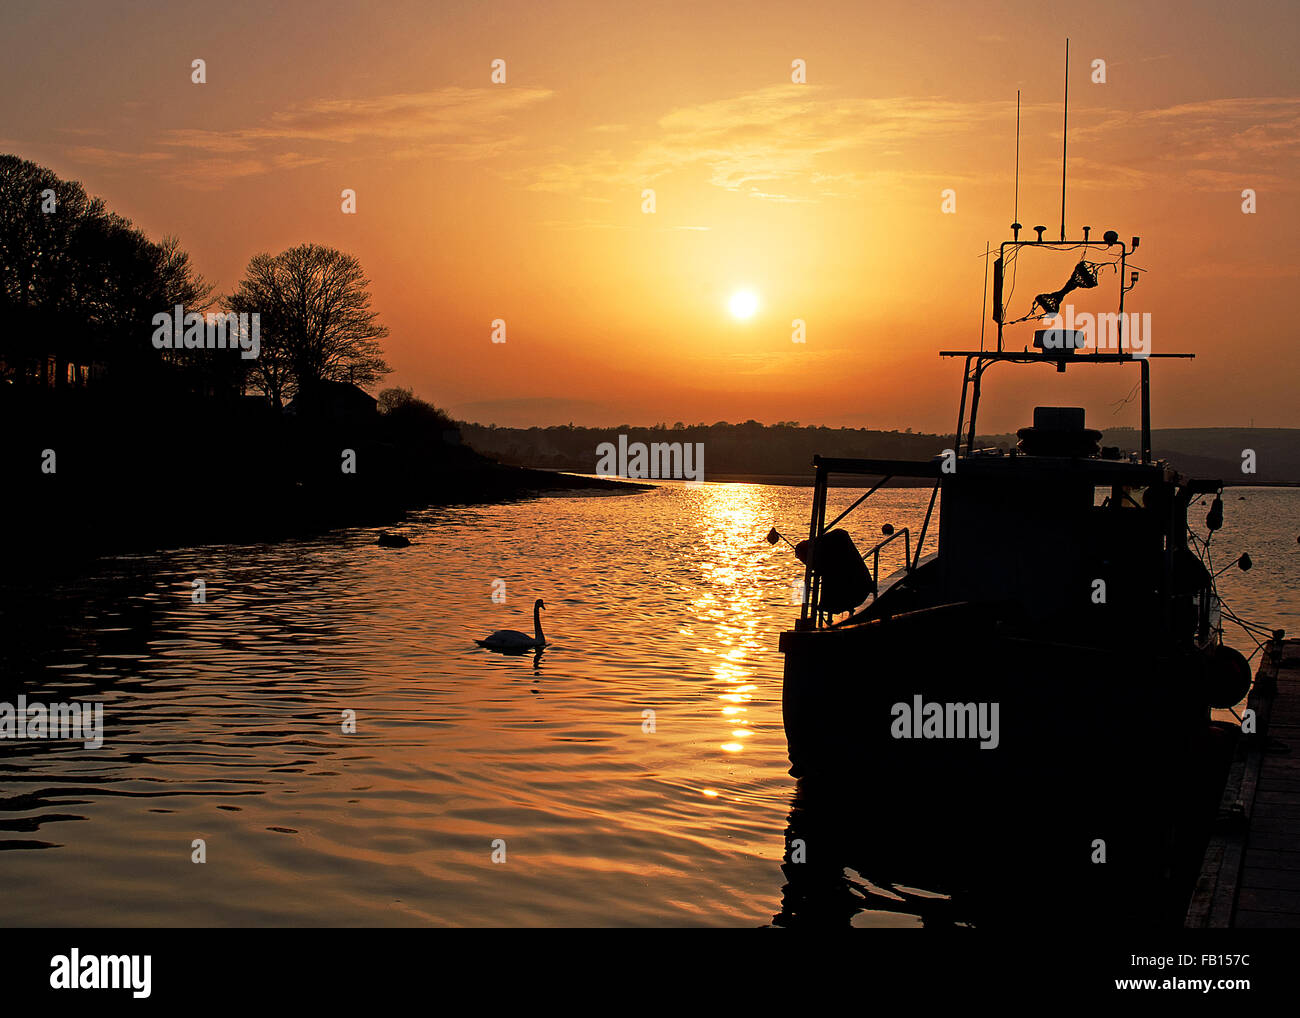 Vessel Cover Photos Vessel Cover Images Alamy